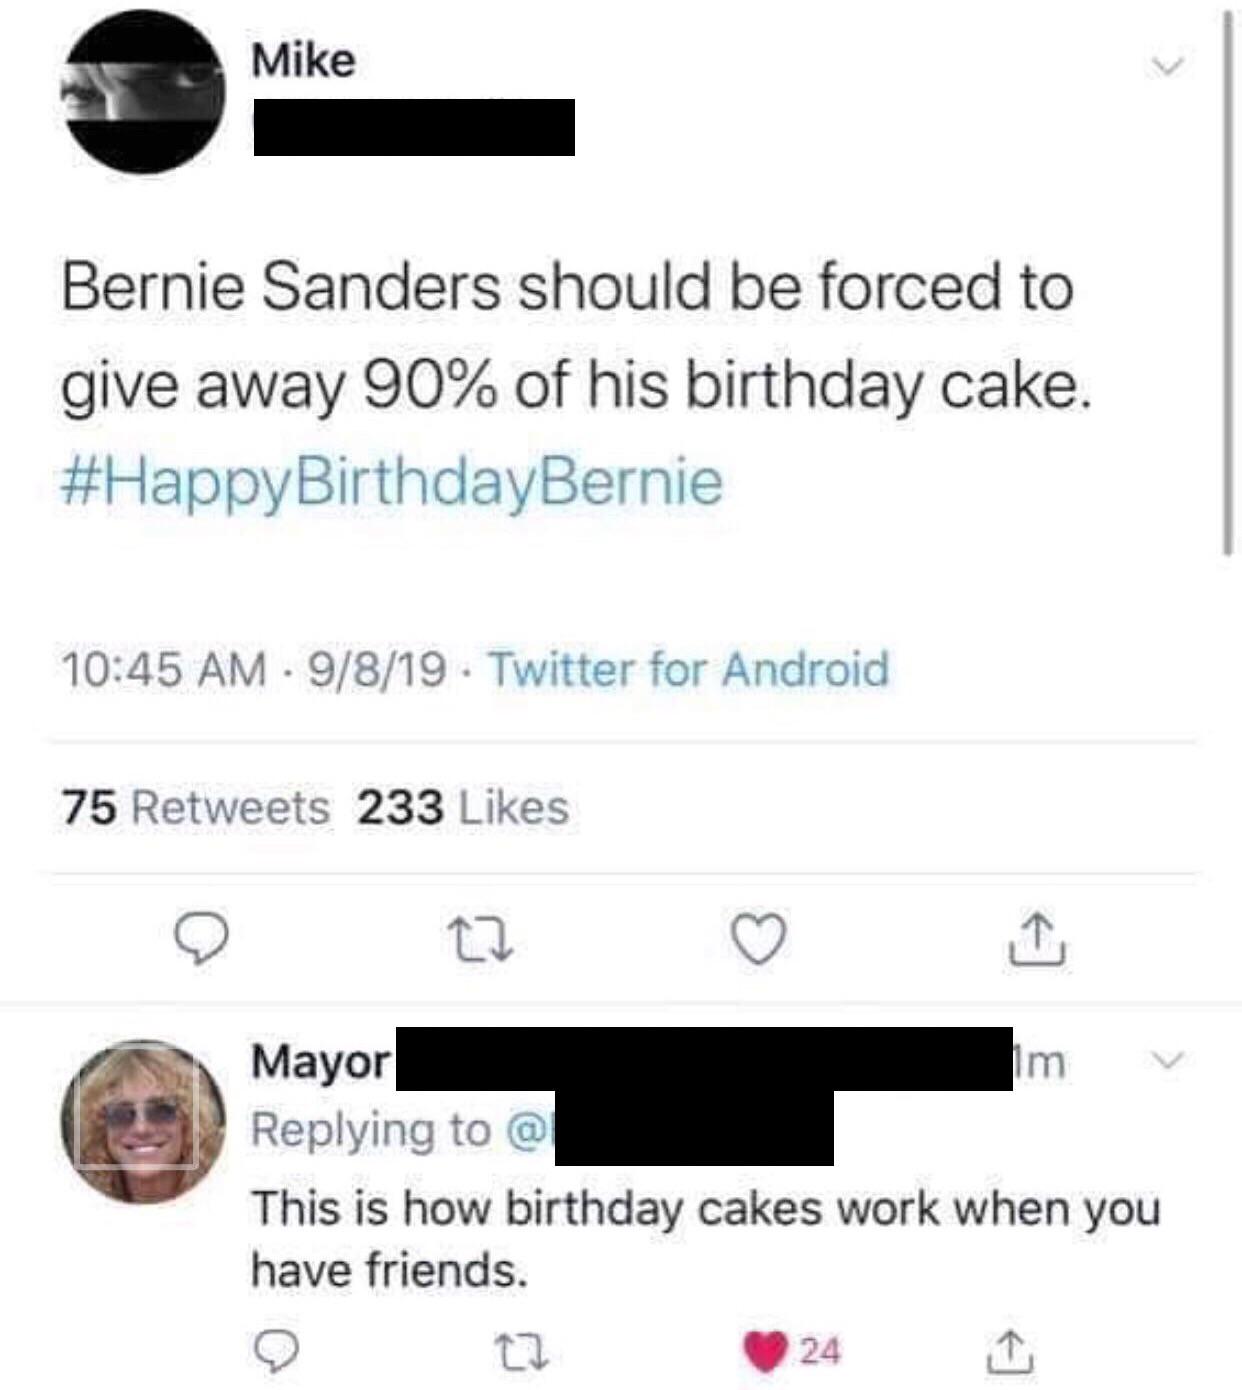 Mike Bernie Sanders should be forced to give away 90% of his birthday cake. 9819. Twitter for Android 75 233 Mayor @ This is how birthday cakes work when you have friends.